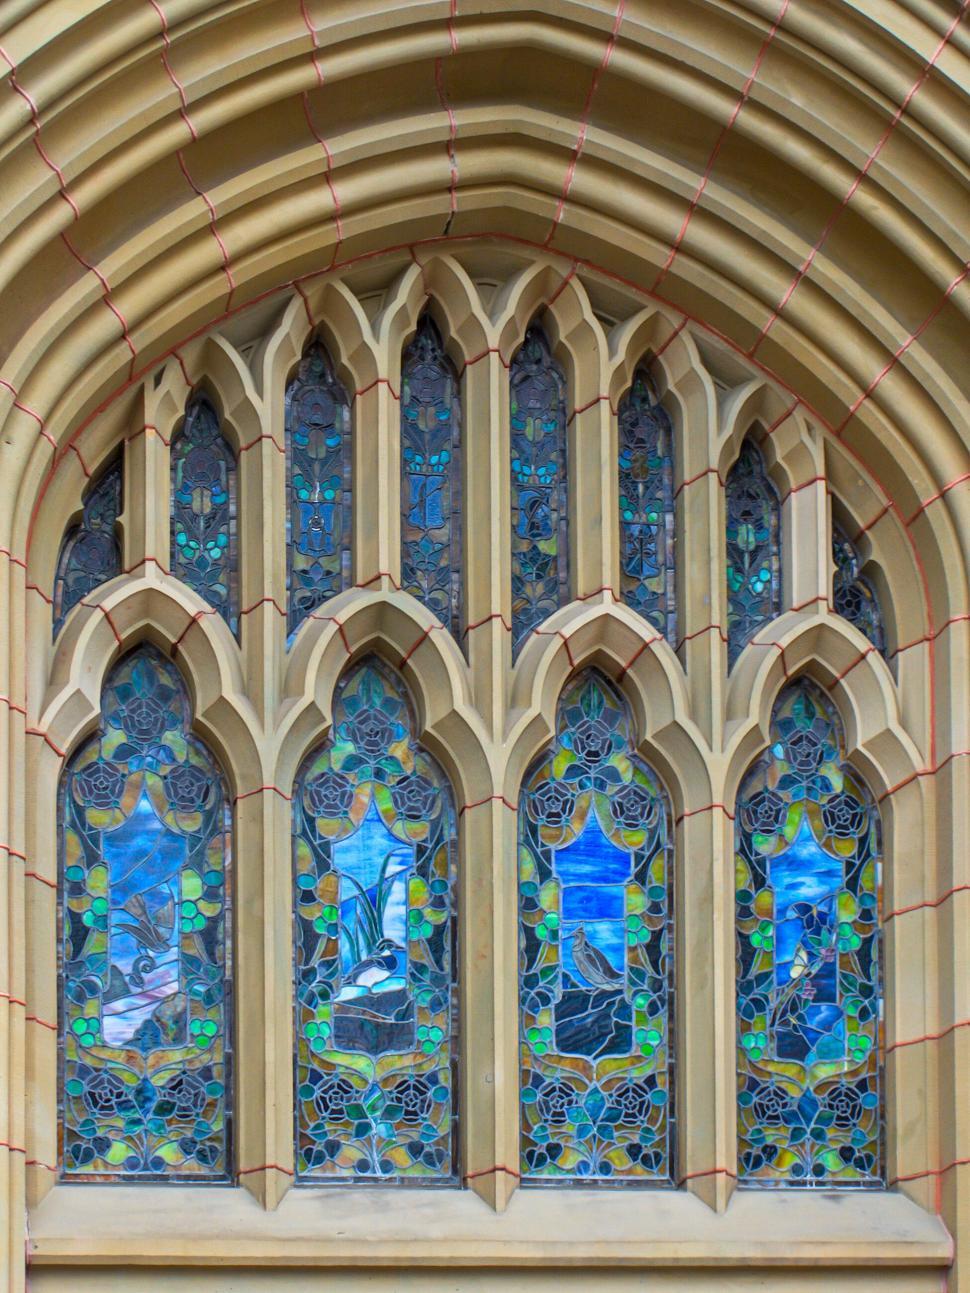 Free Image of Stained Glass Windows in a Gothic Revival Church 